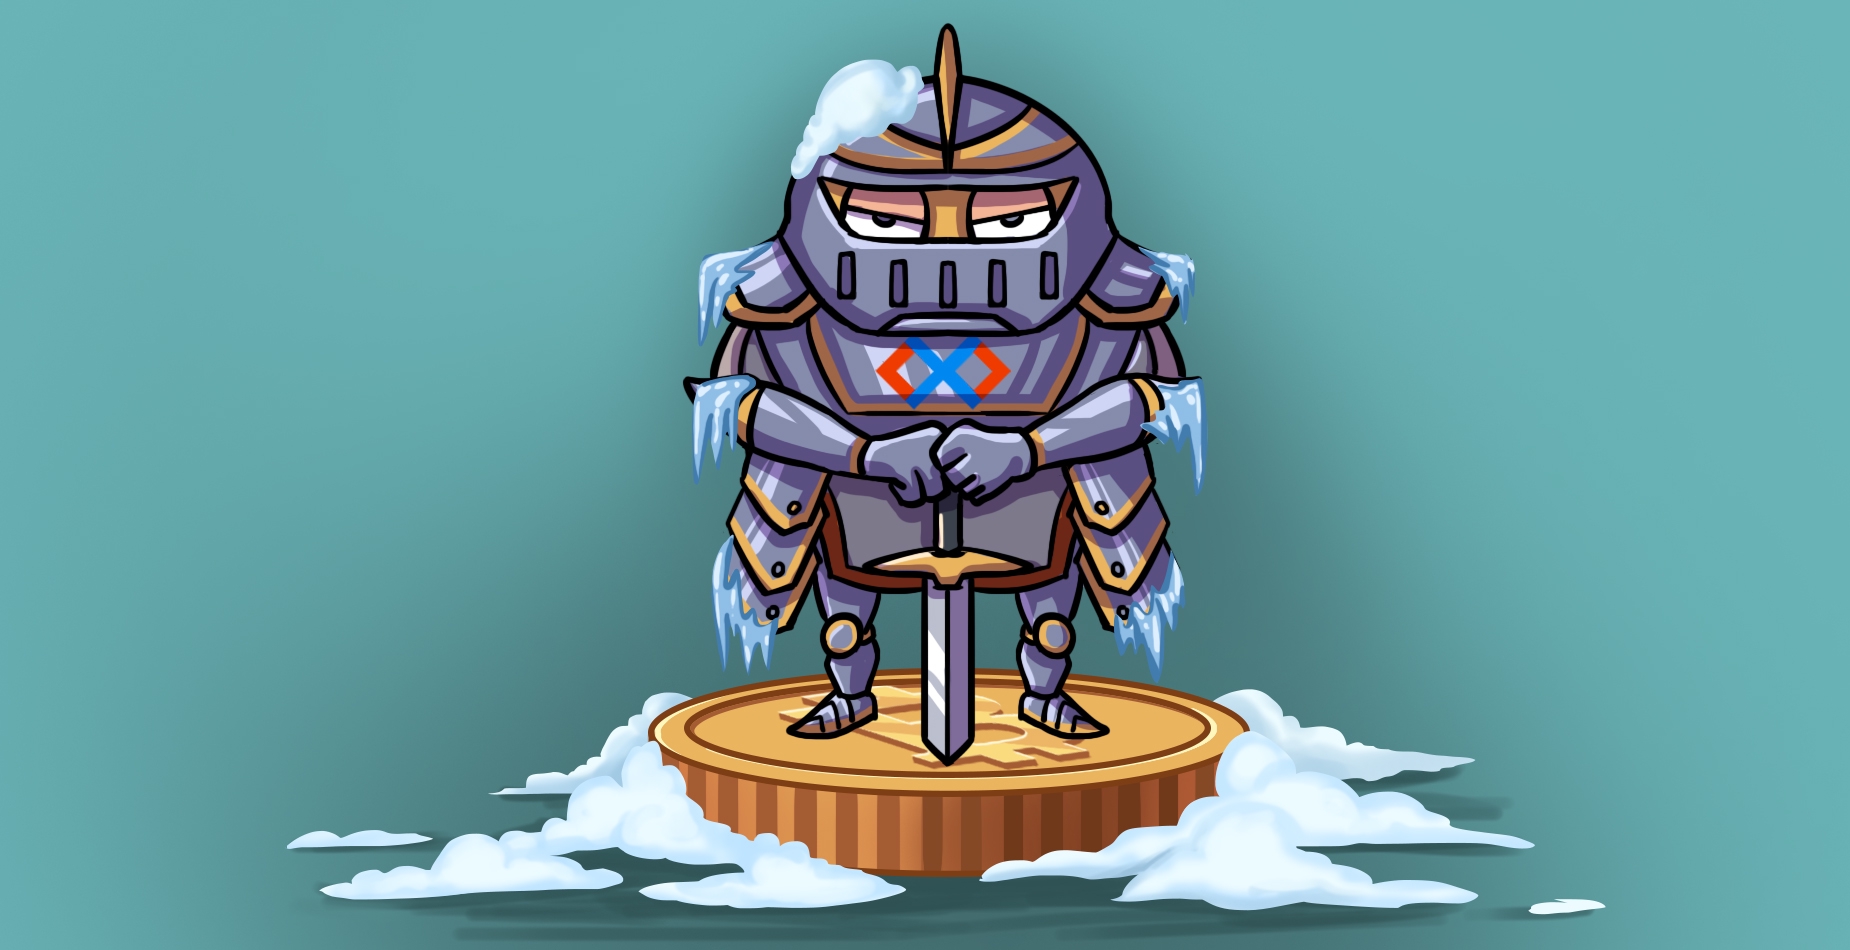 A coin in knights armor with a sword, standing on a bitcoin.